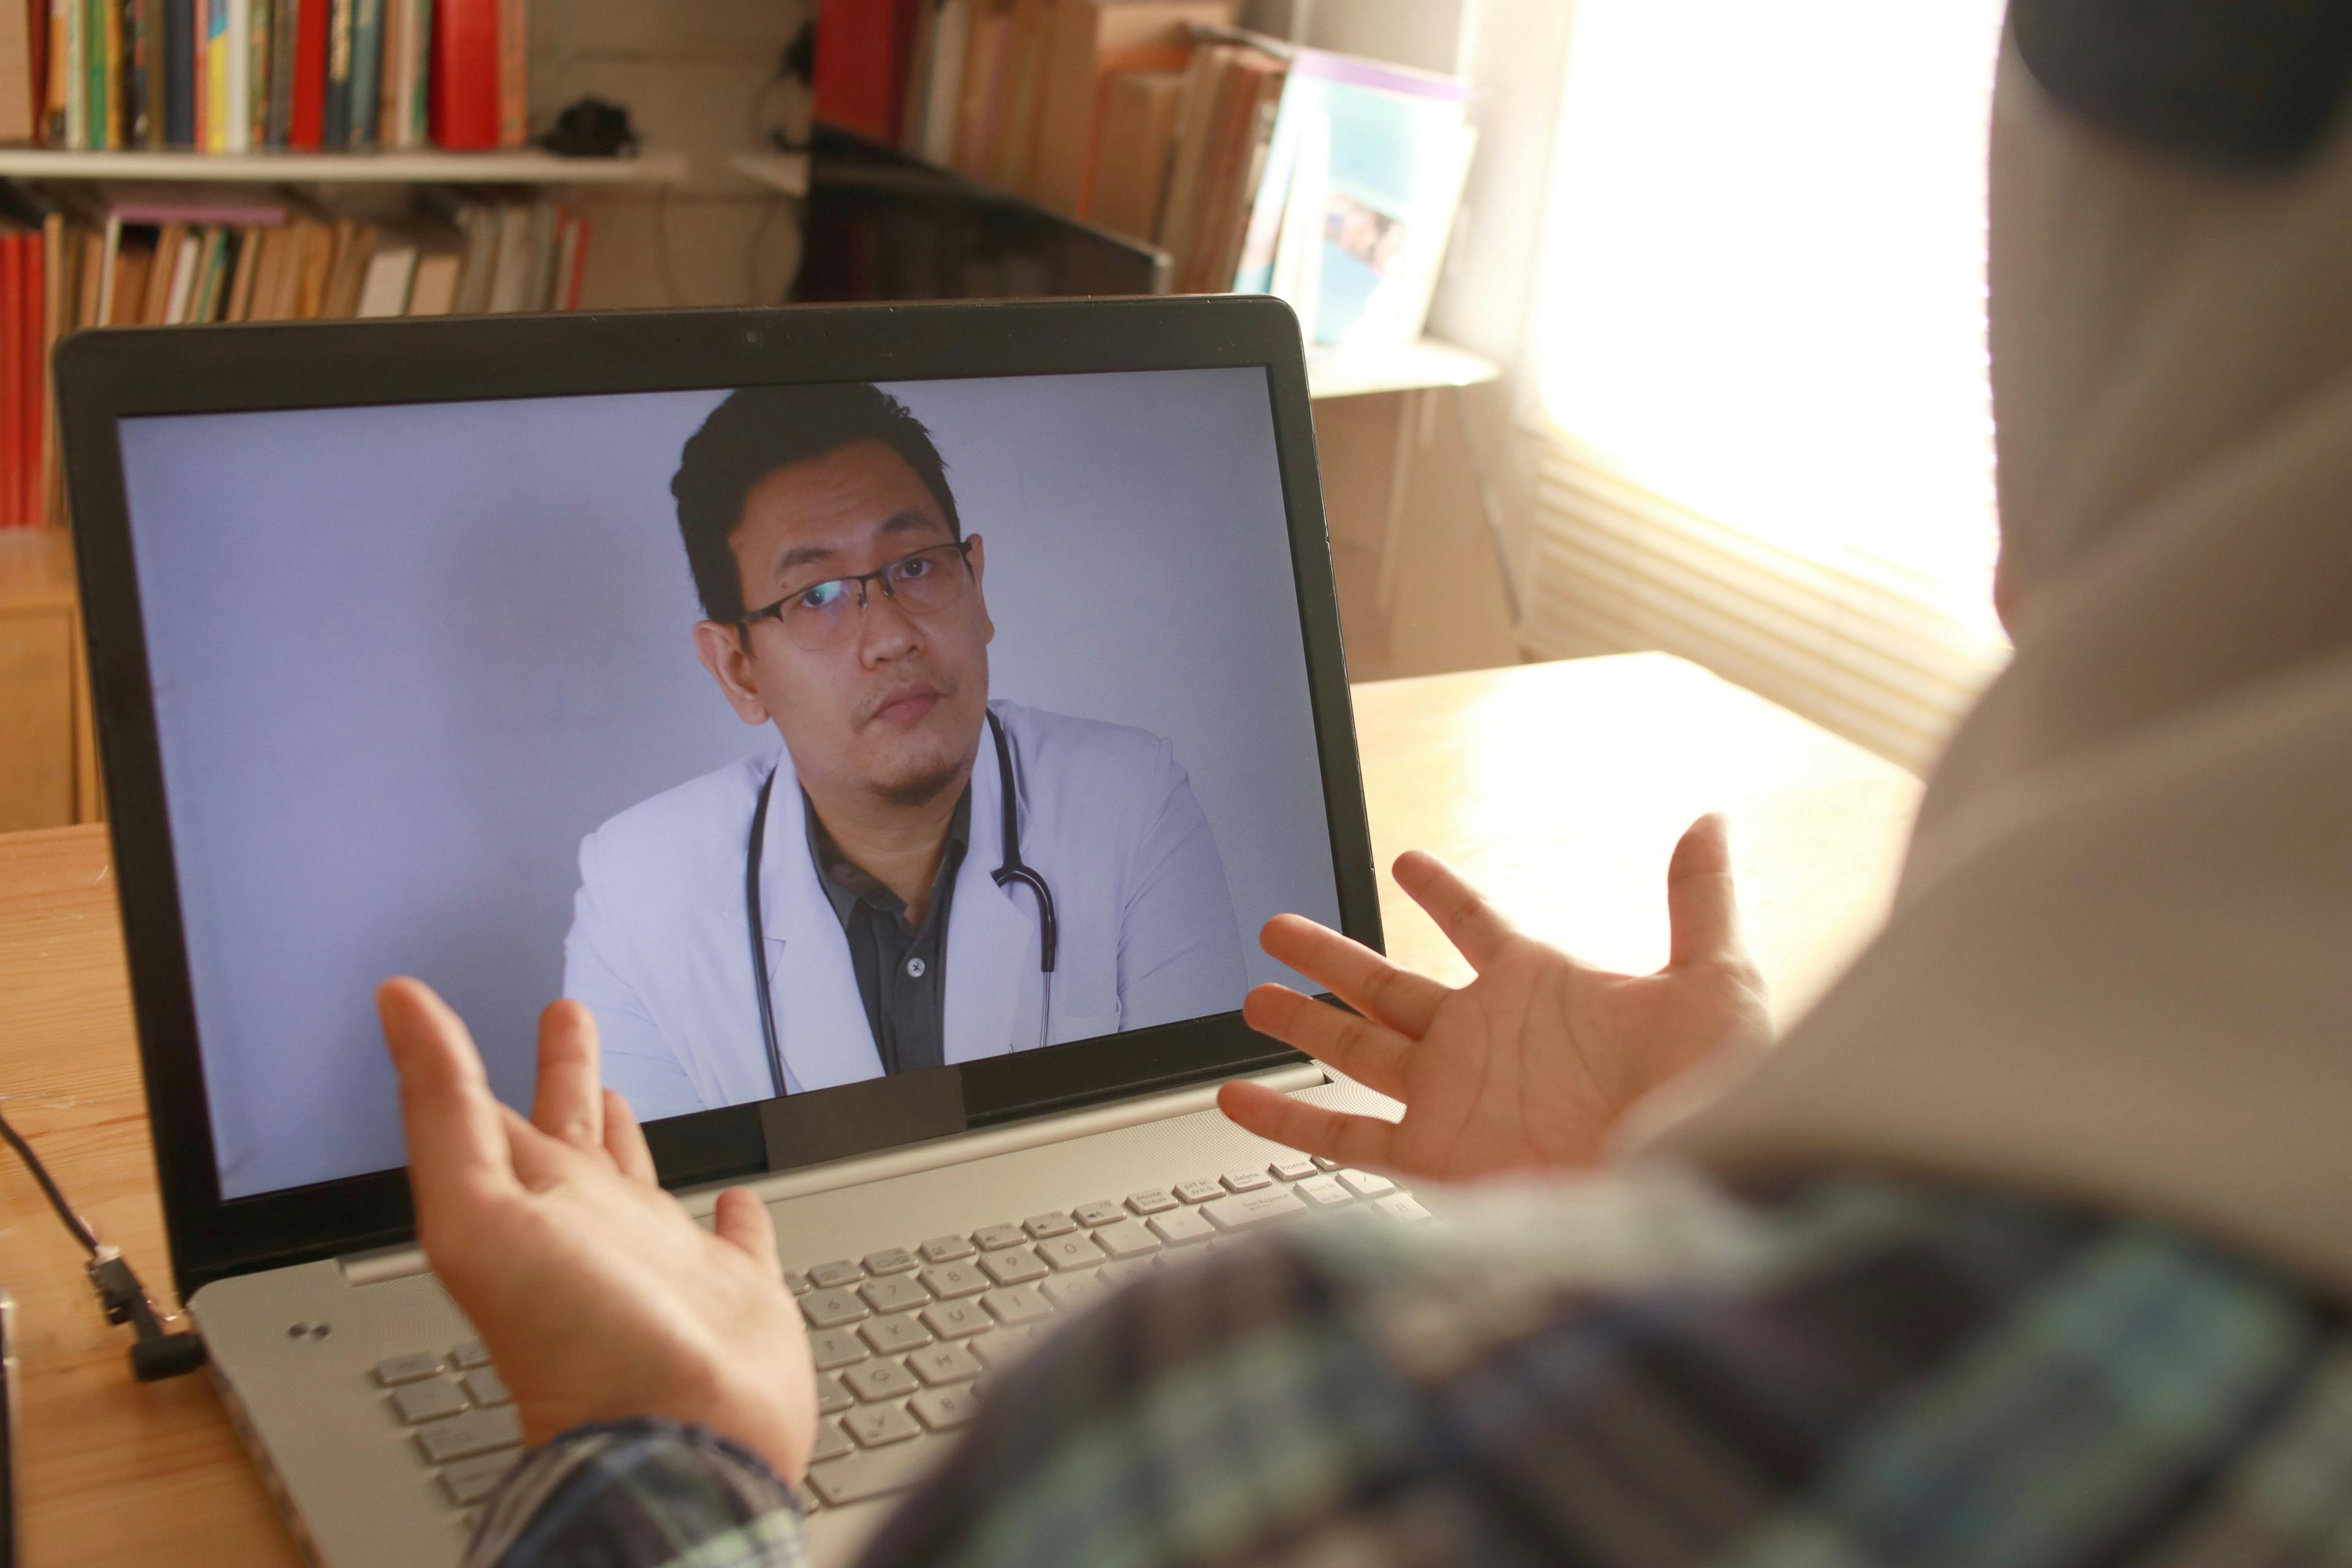 Medication Modification Equivalent for Virtual and In-Person Psychiatric Visits